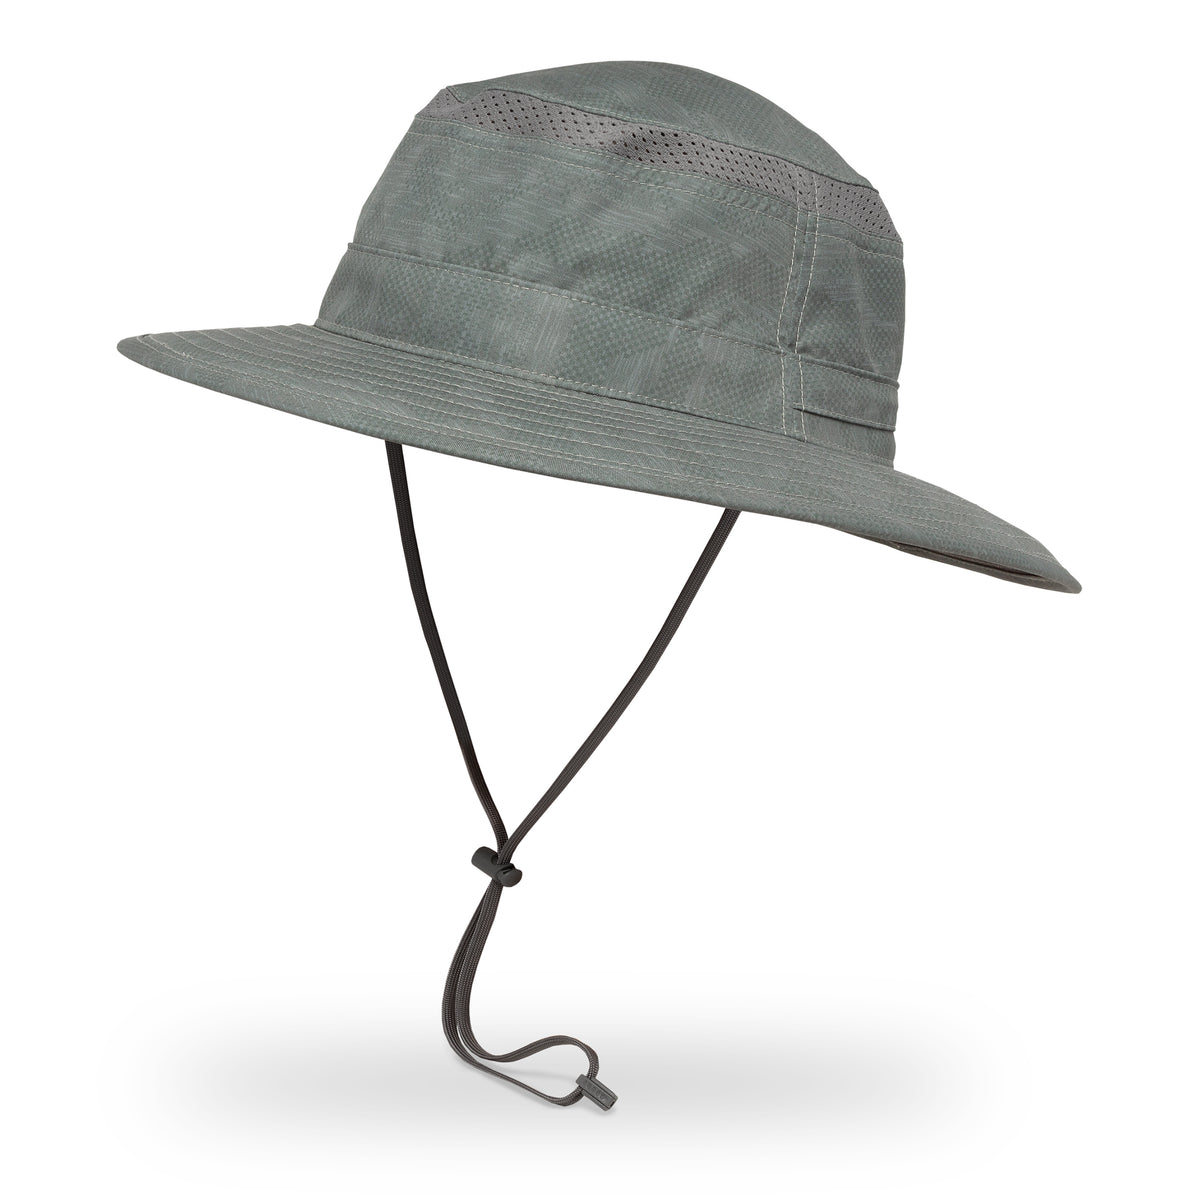 Hot Bucket Hats Boonie Visor Hunting Fishing Outdoor Summer Caps Unisex  Washed D